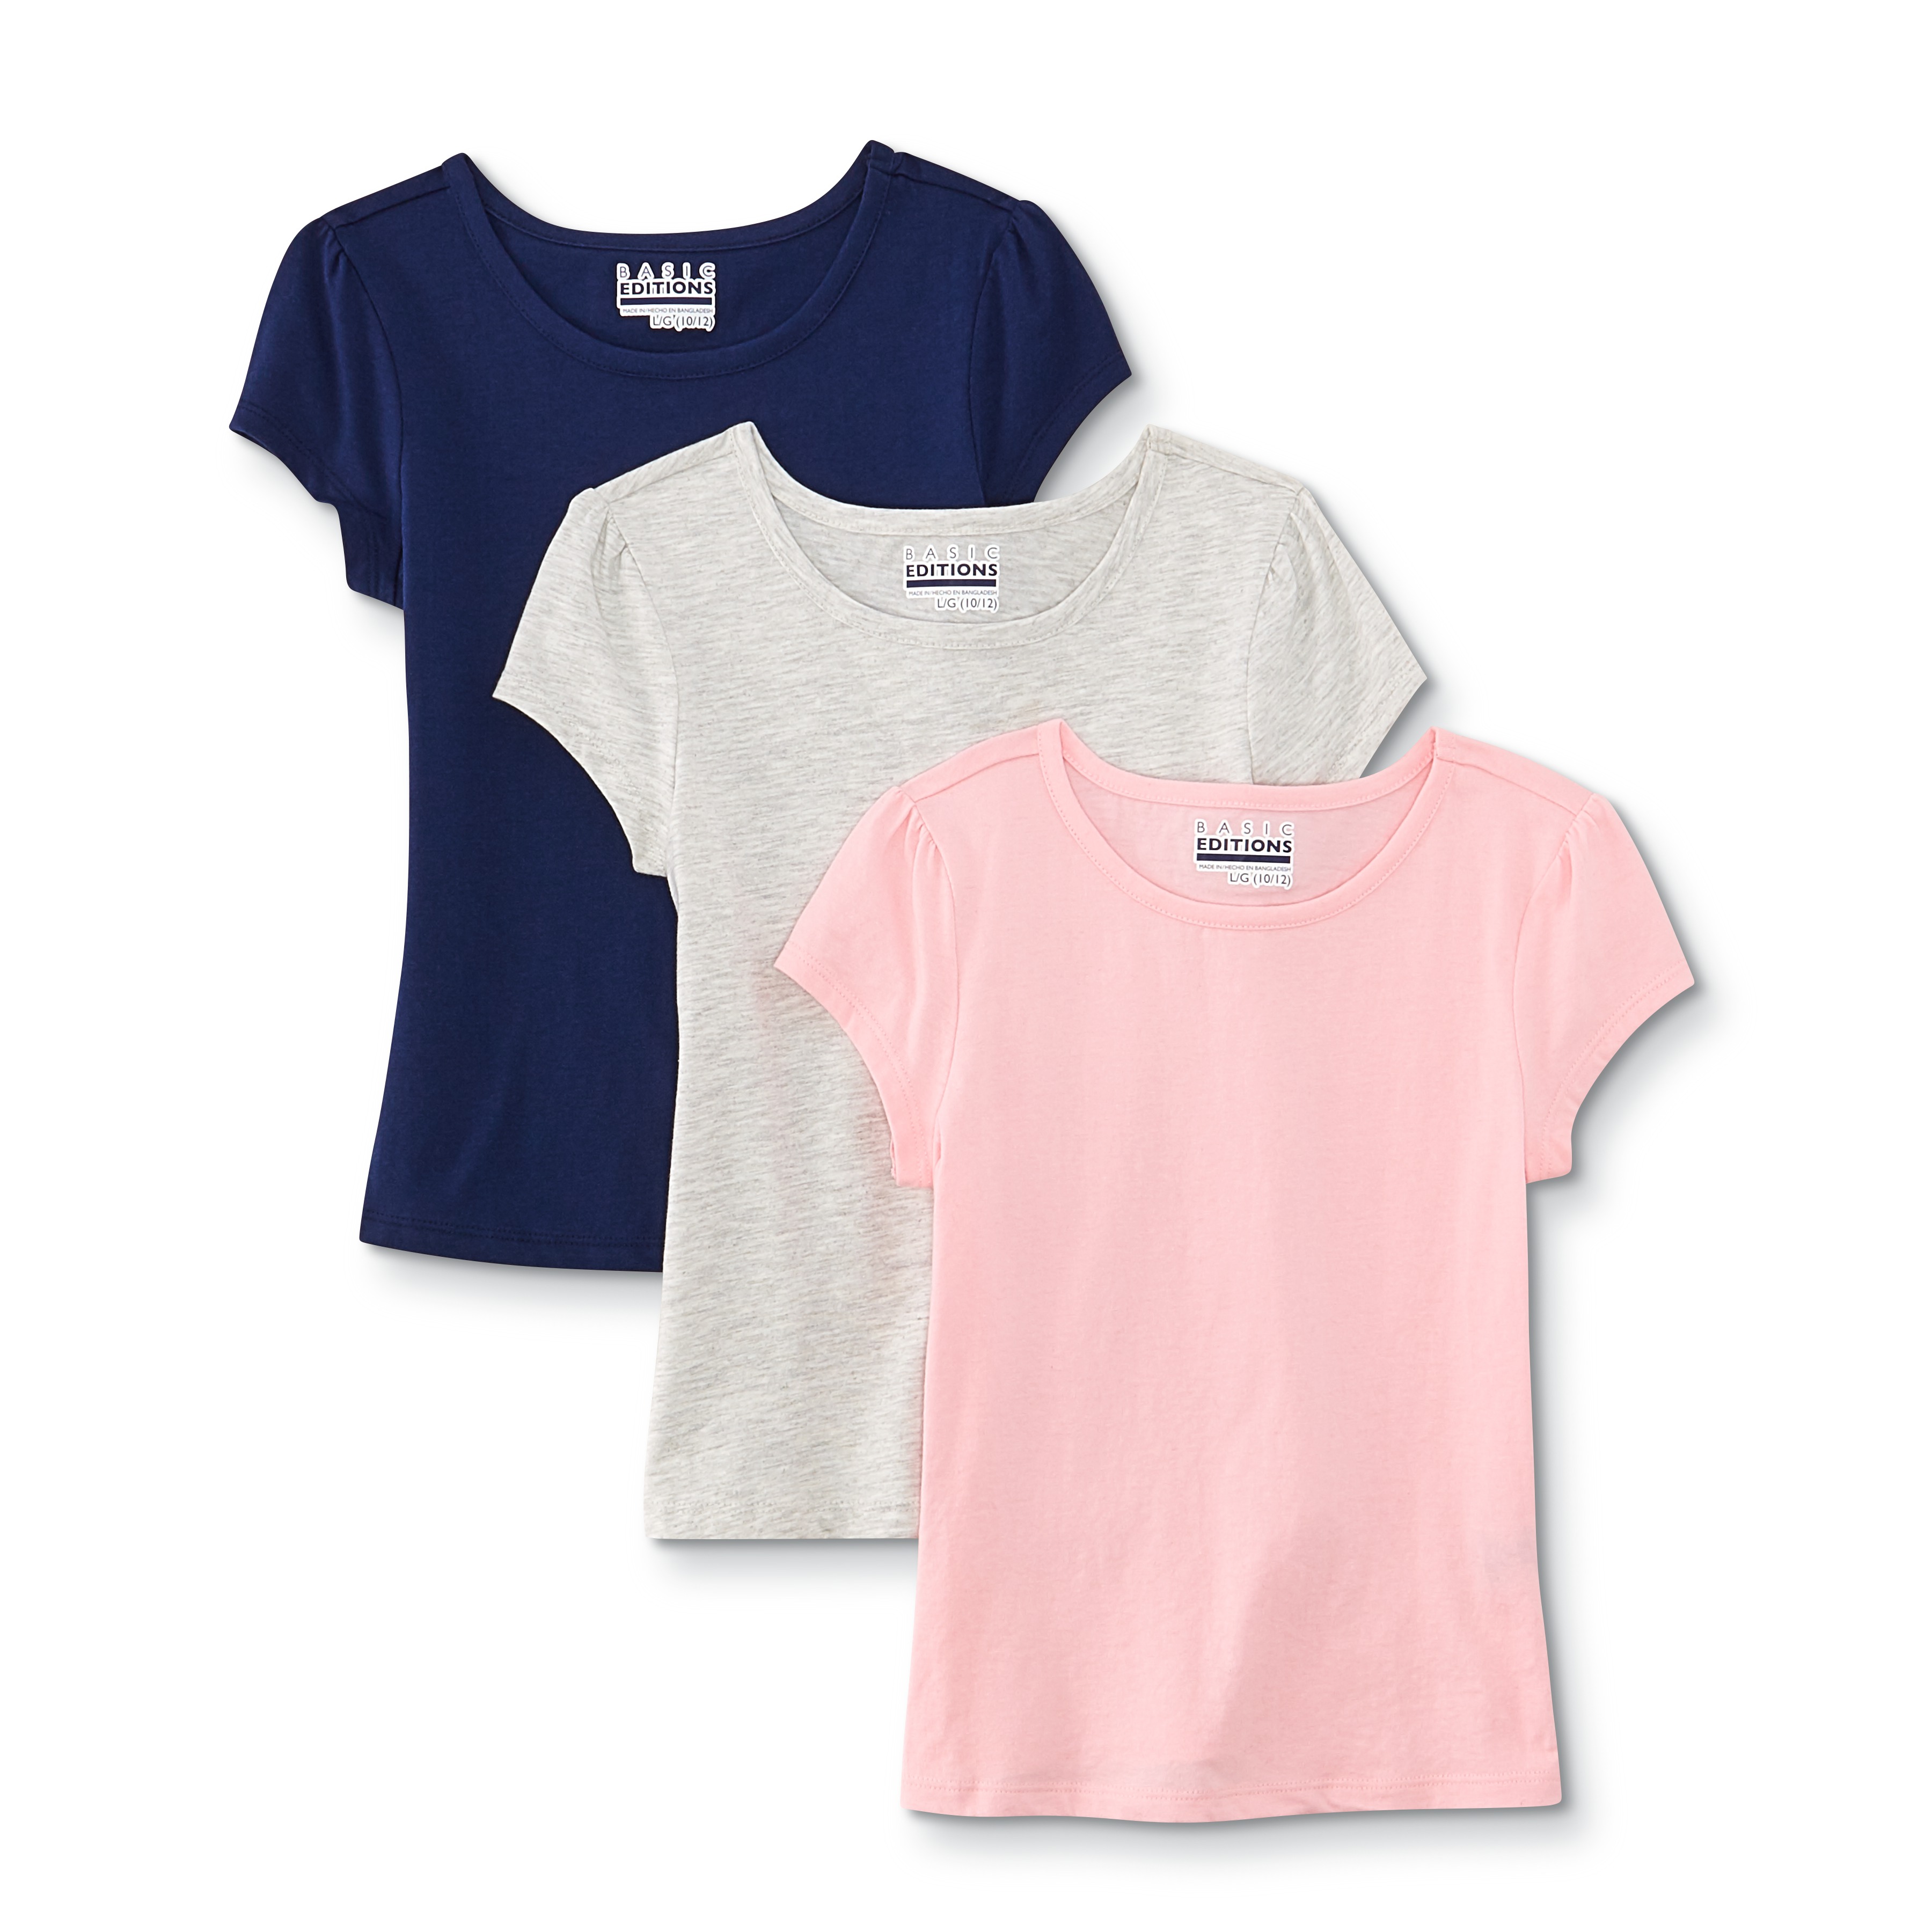 Basic Editions Girls' 3-Pack T-Shirts - Solid & Heathered